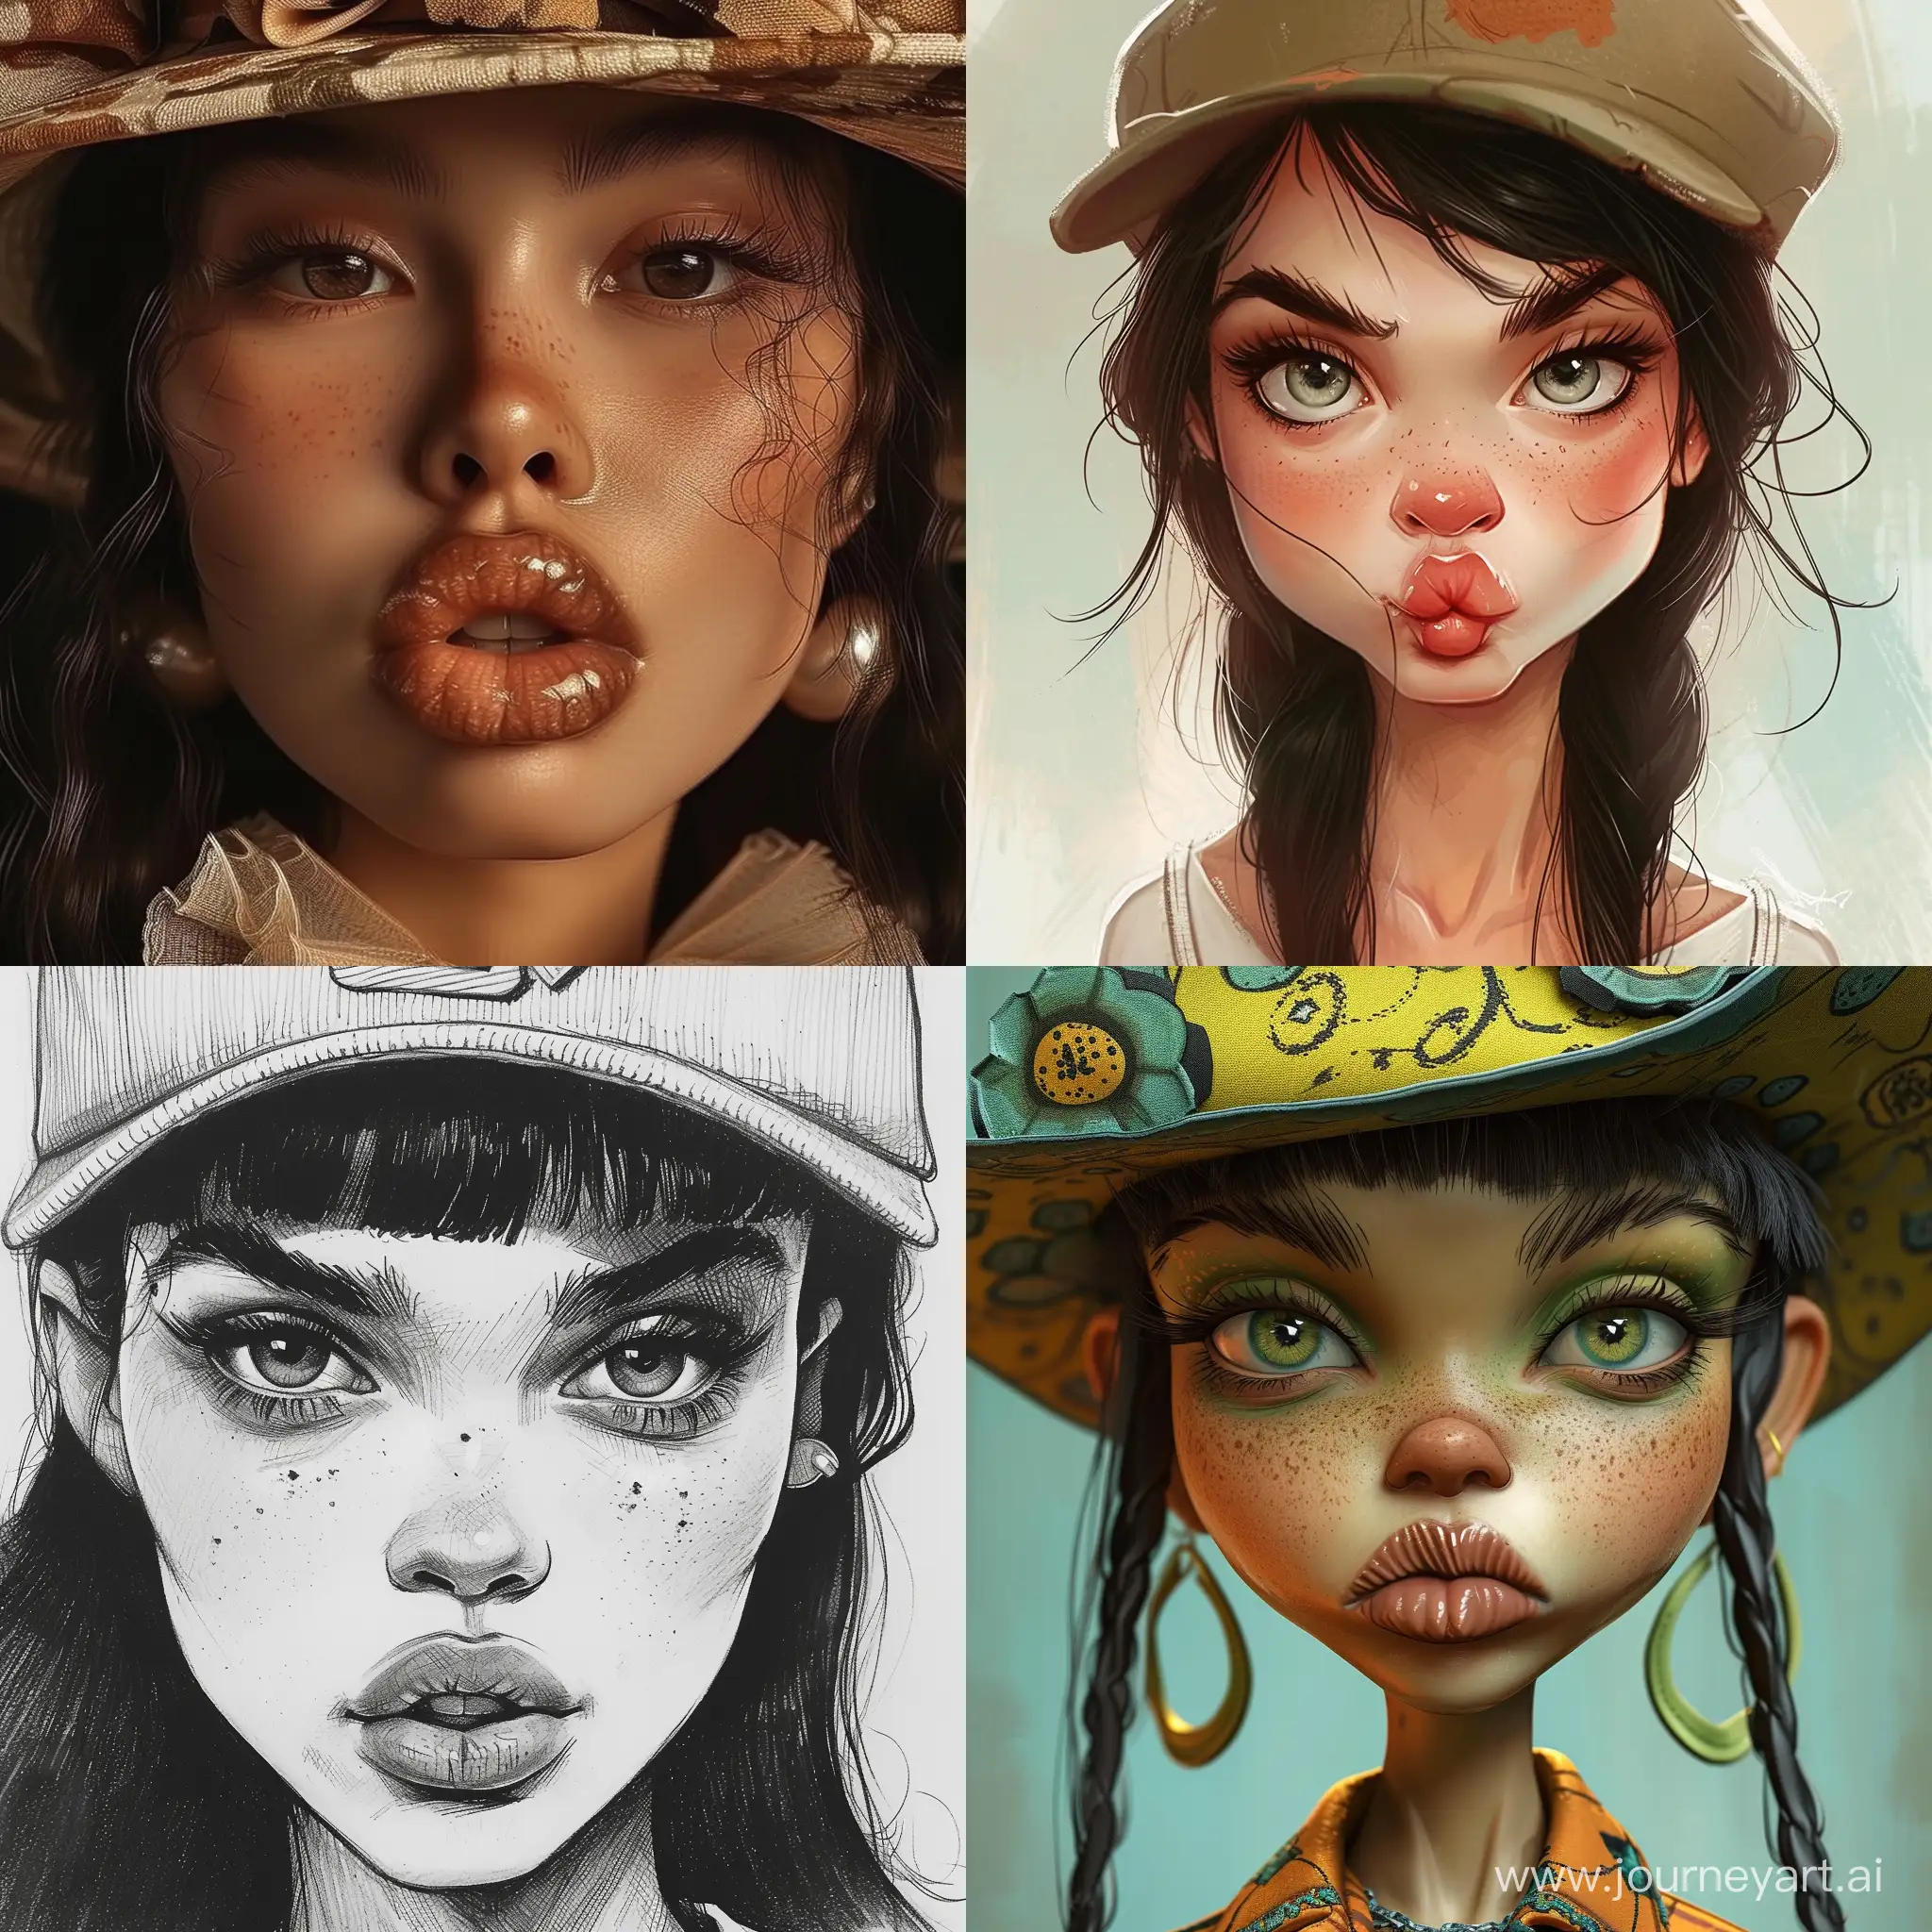 Adorable-Girl-with-Unique-Lip-Features-and-Perry-the-PlatypusInspired-Hat